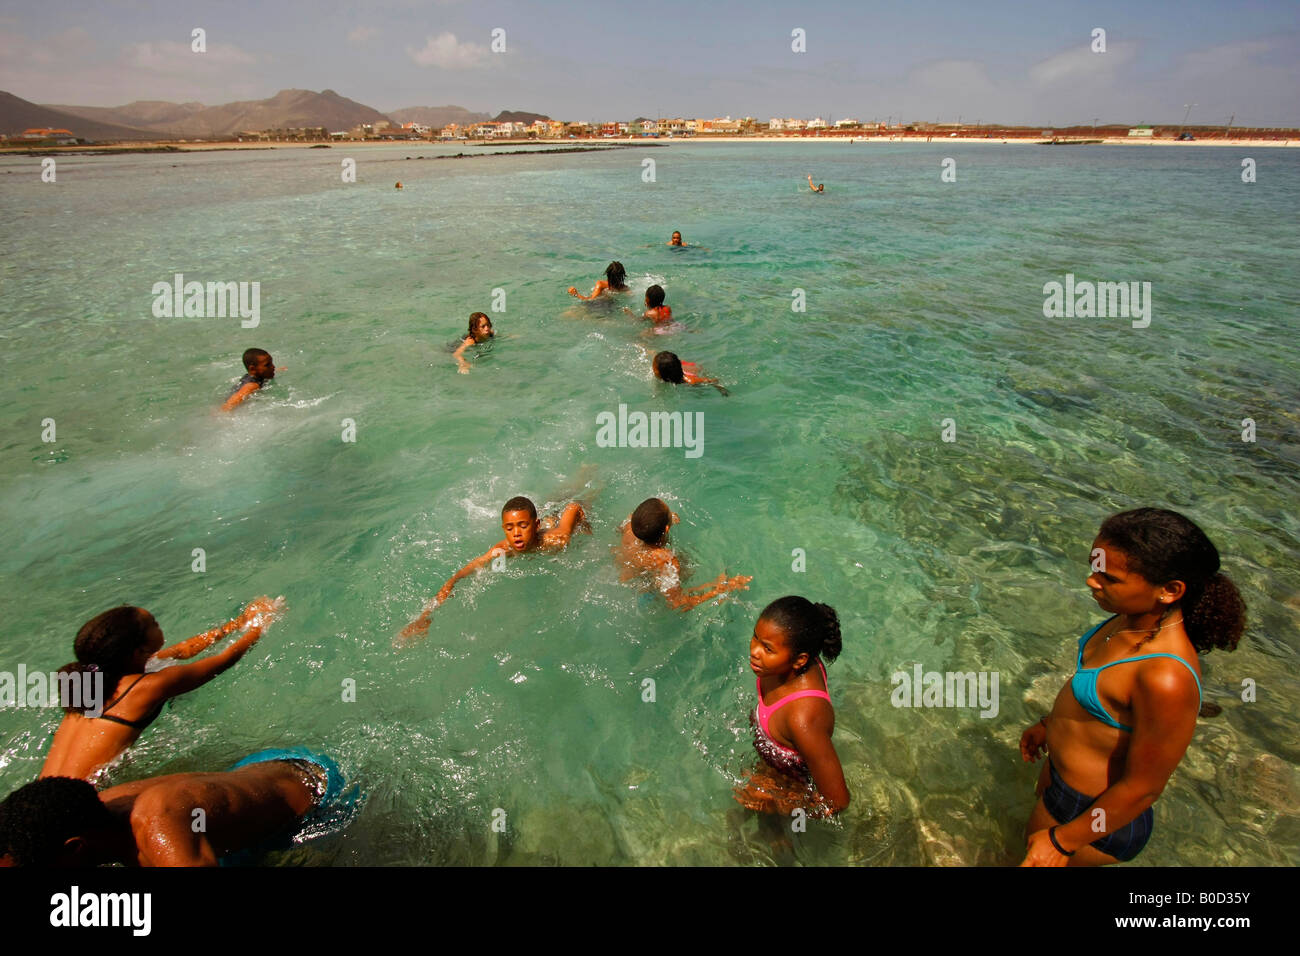 youth swimming in the clear water at the beach Baia das Gatas on Sao Vicente island Cape Verde Africa Stock Photo